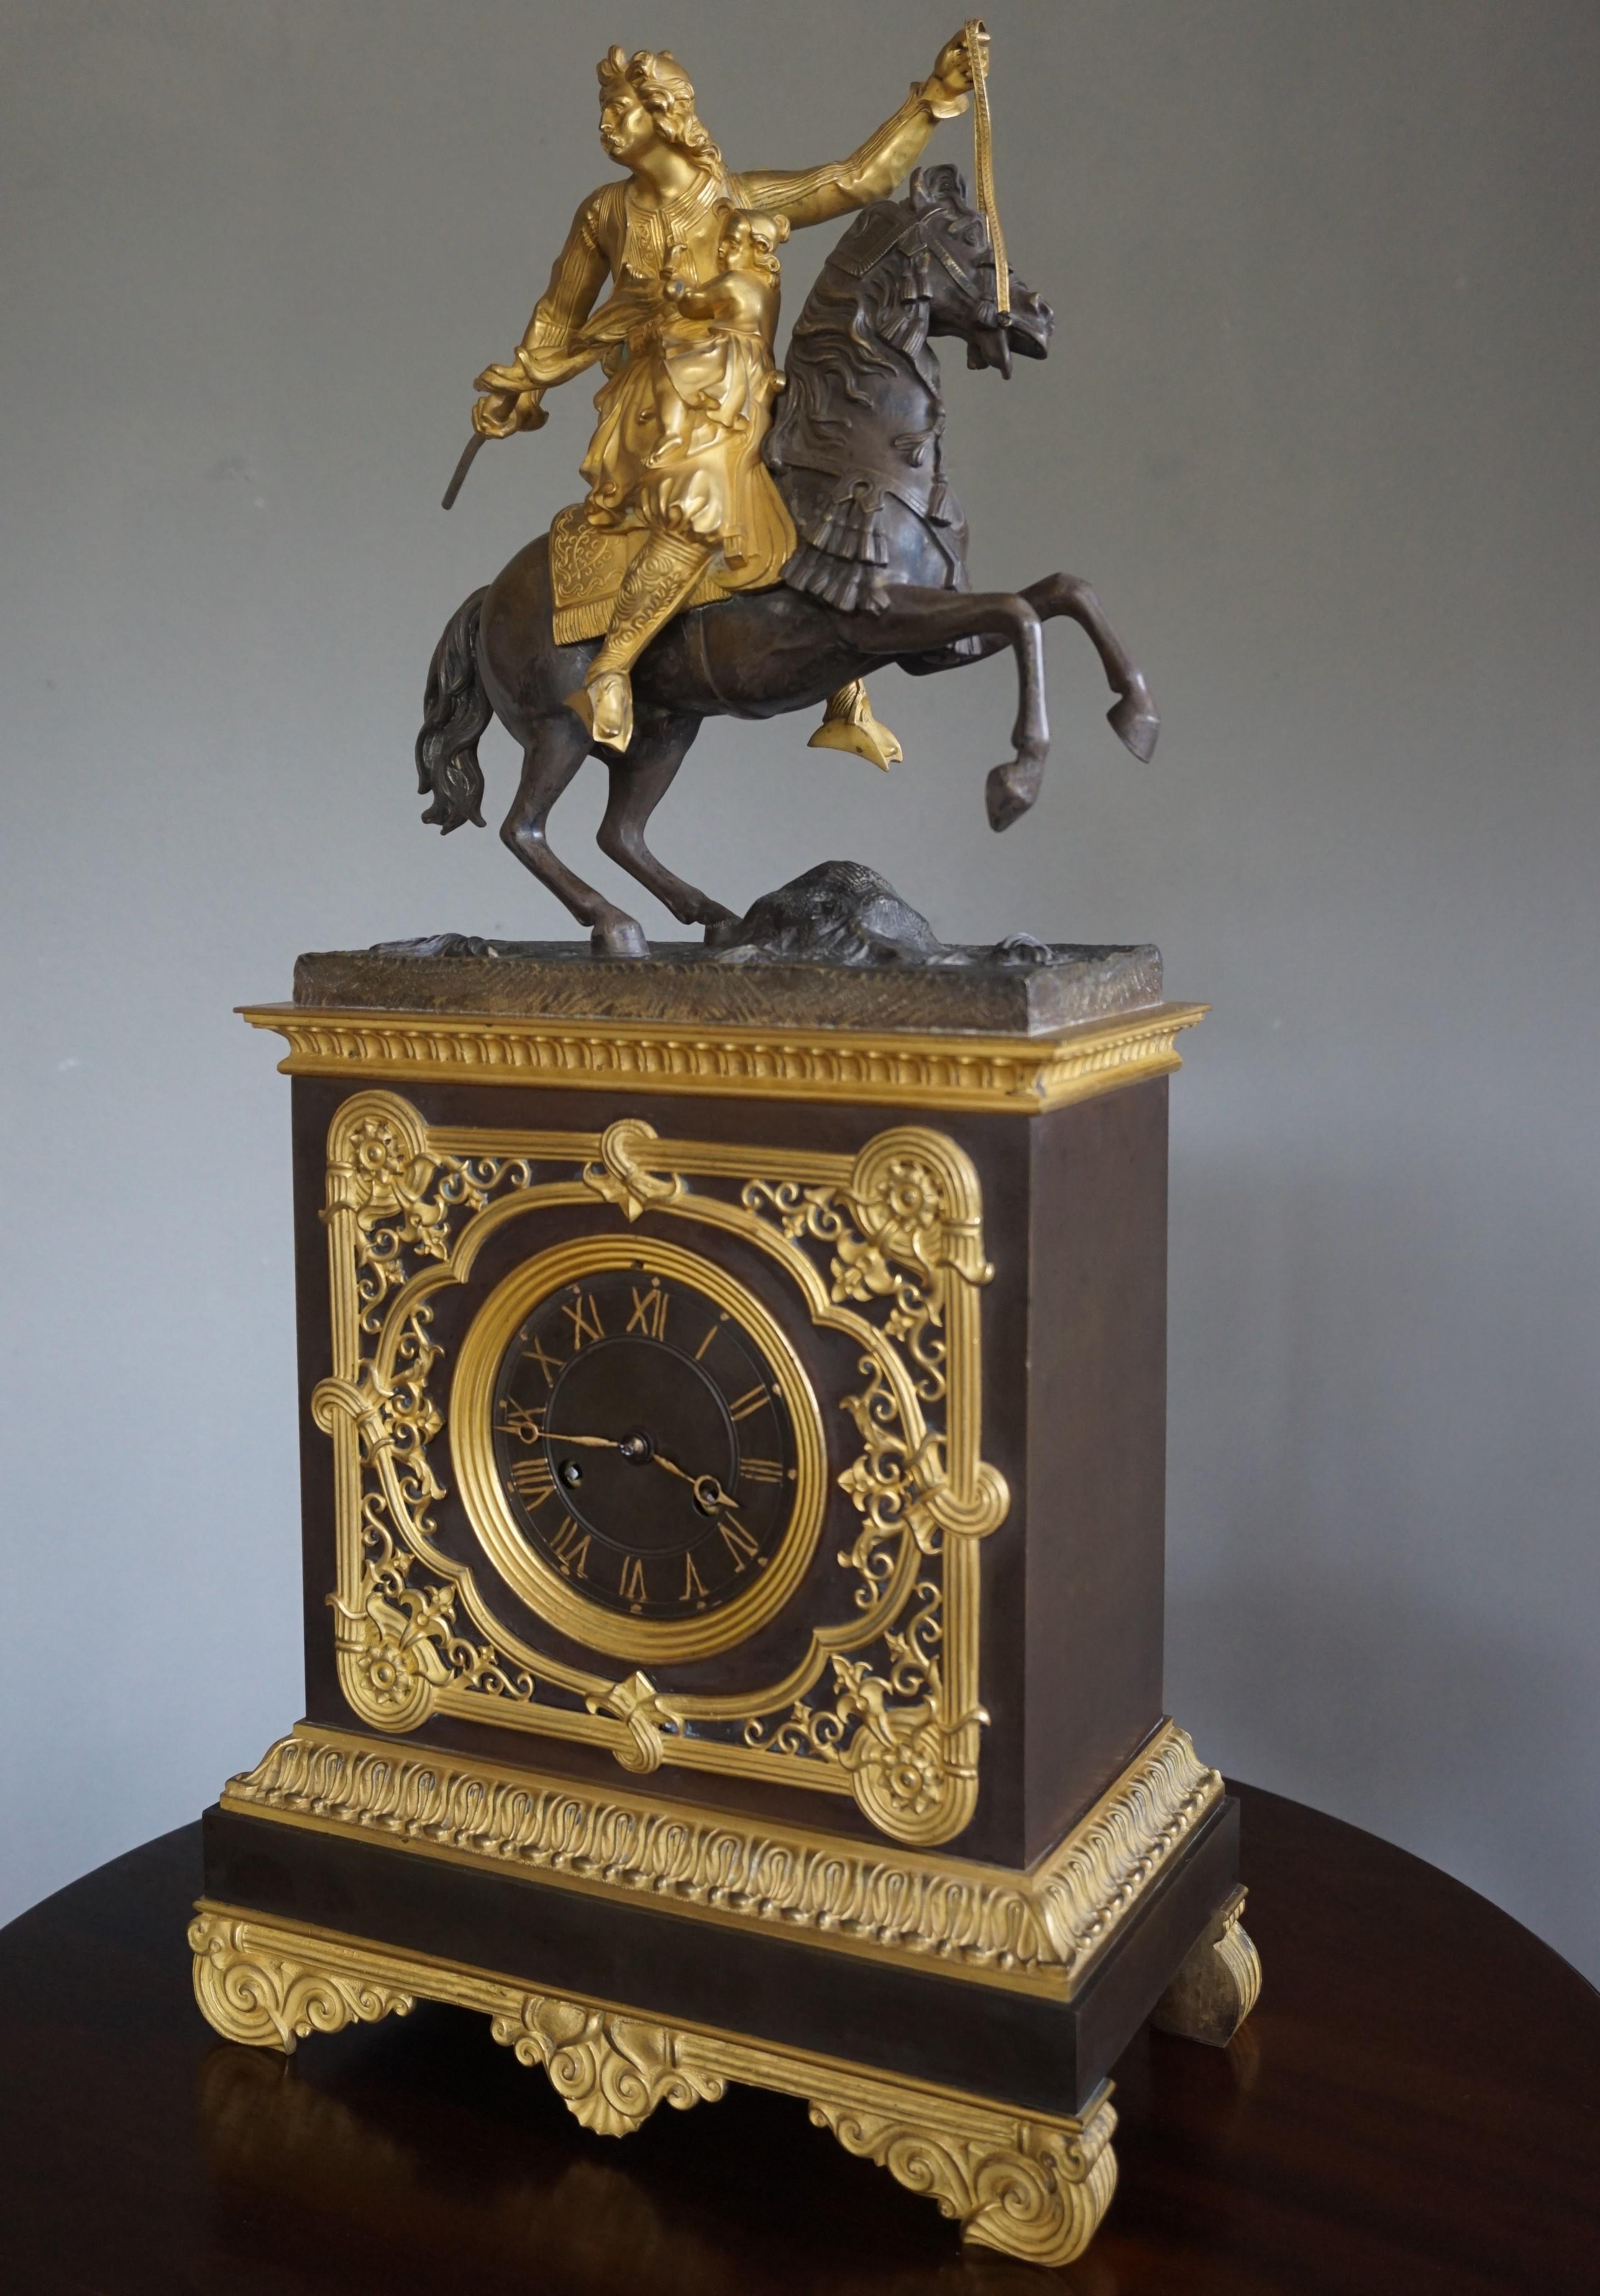 Wonderful, rare and sizable antique clock from the early to mid-1800s.

If you are looking for an impressive, stylish and sizable antique clock to grace your mantel piece or side table then this early 1800s French beauty could be perfect for you.